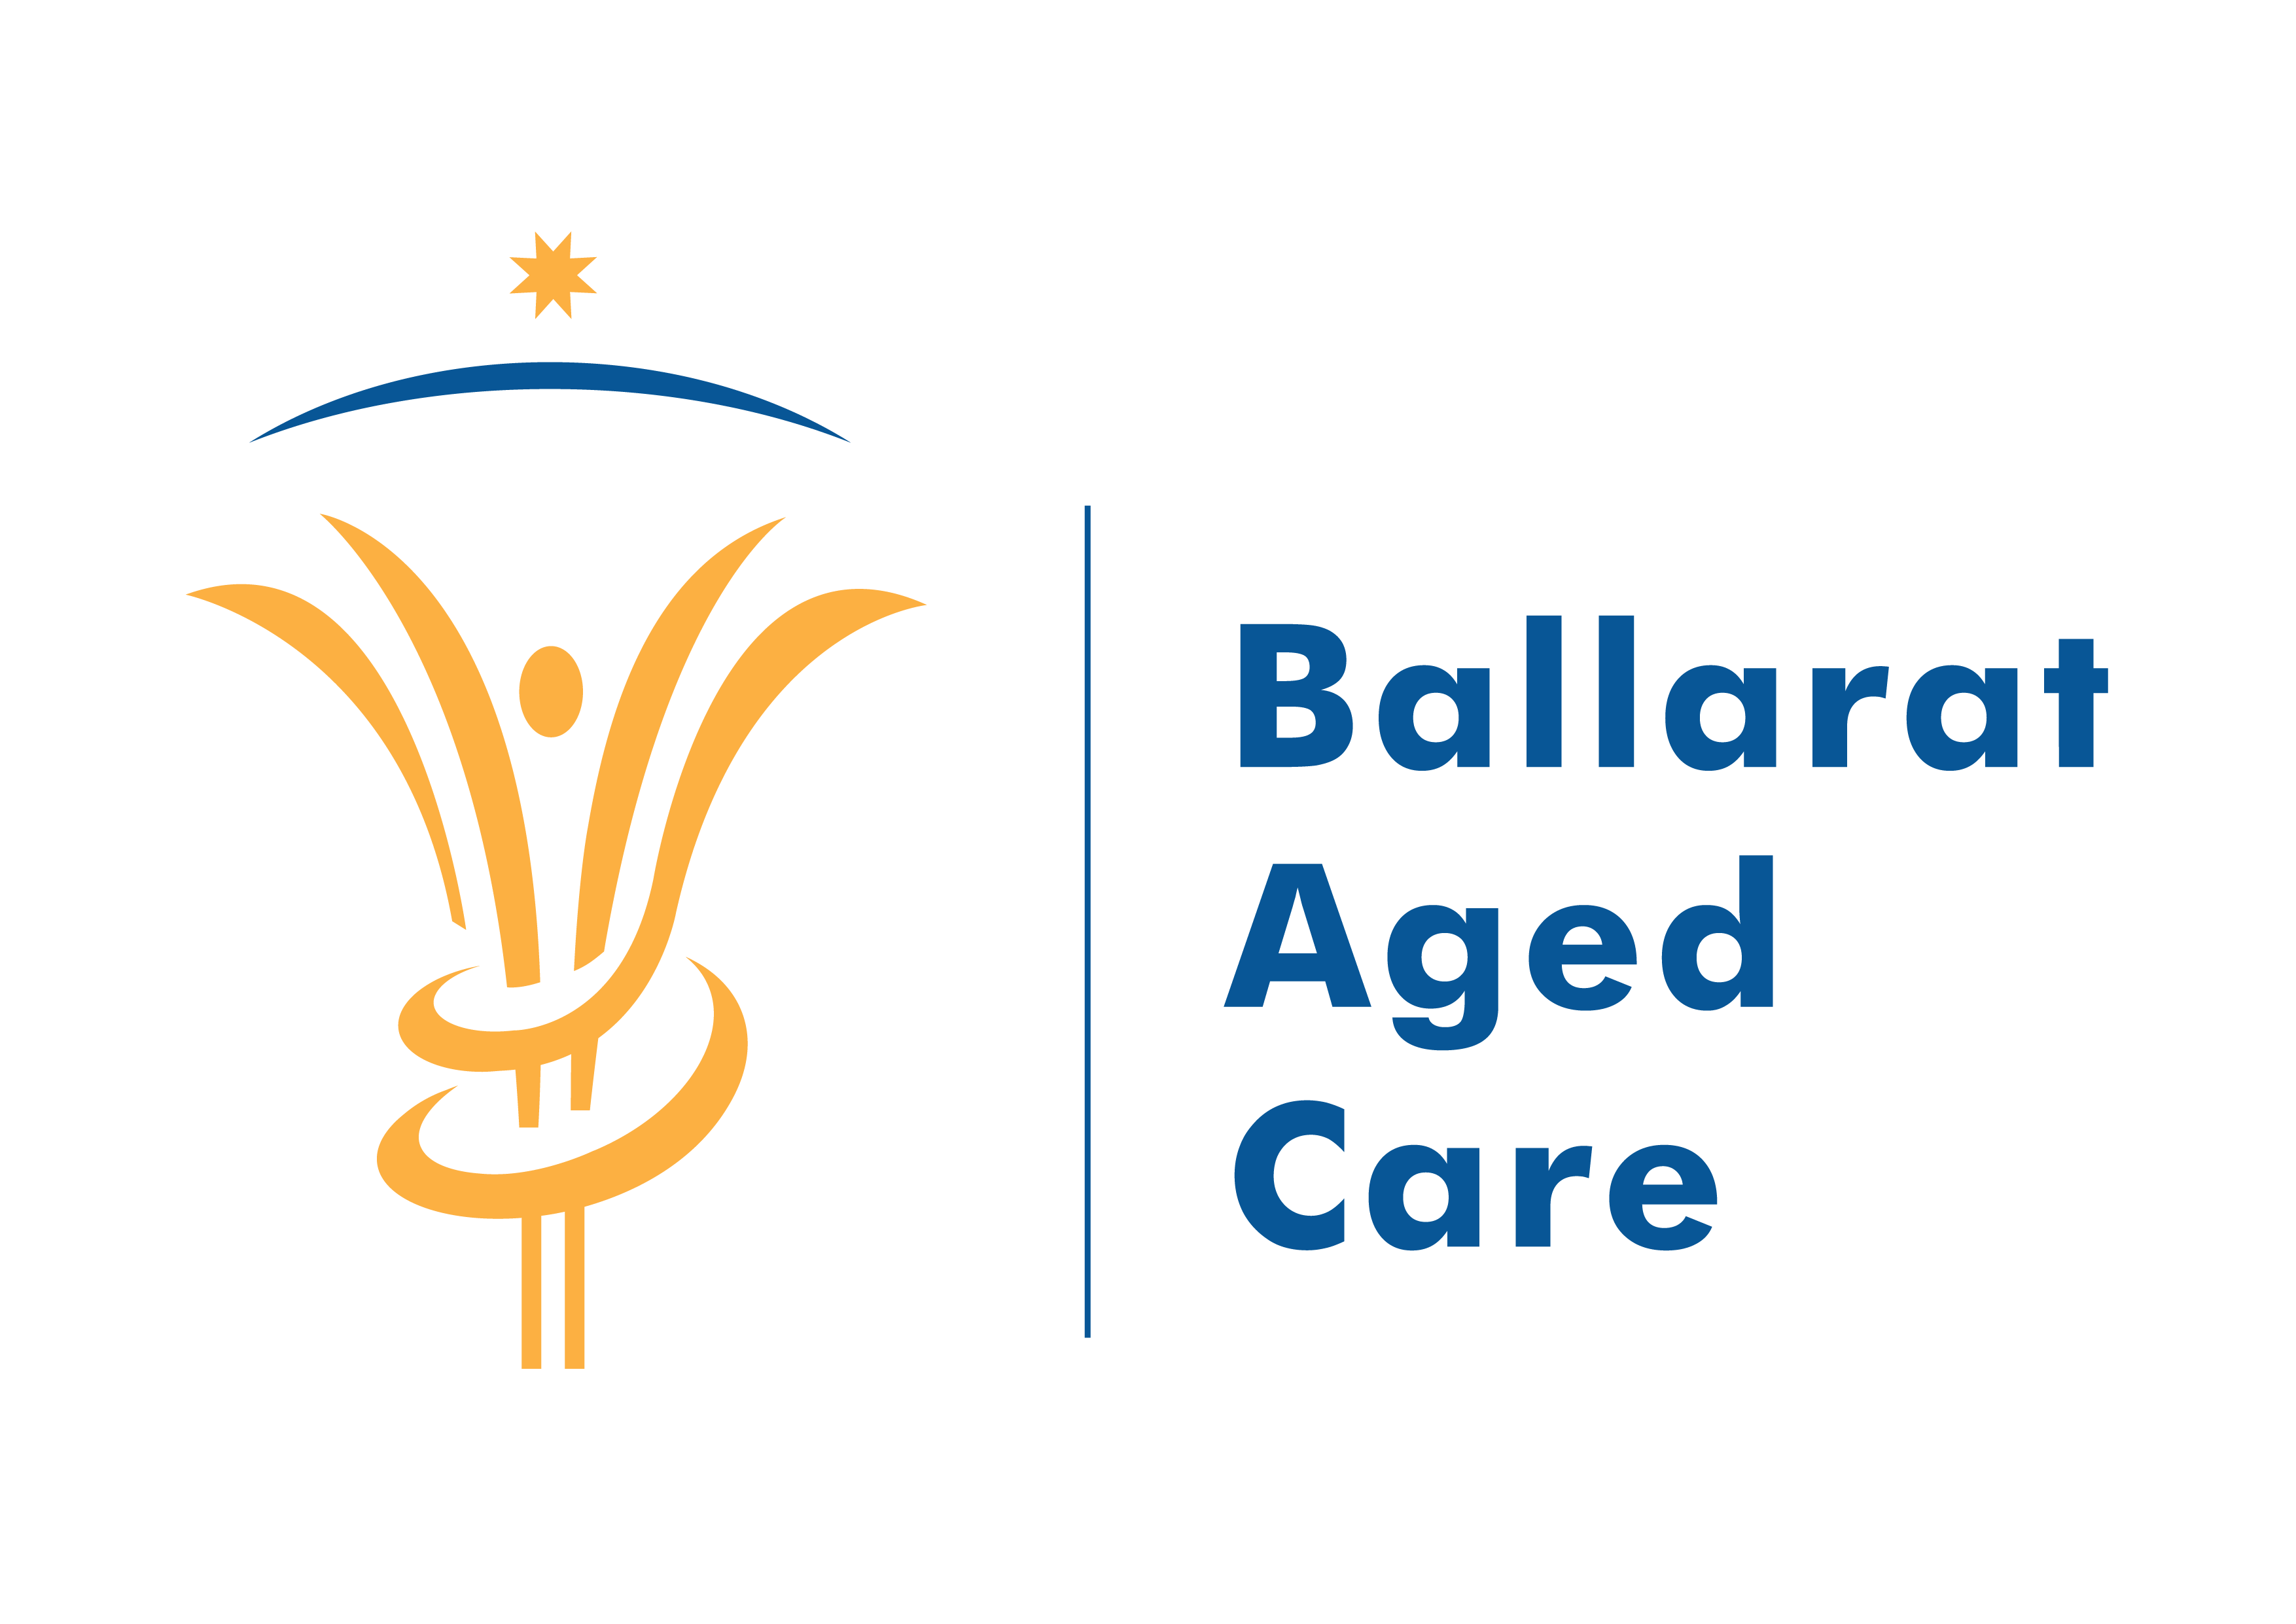 Welcome to Ballarat Aged Care